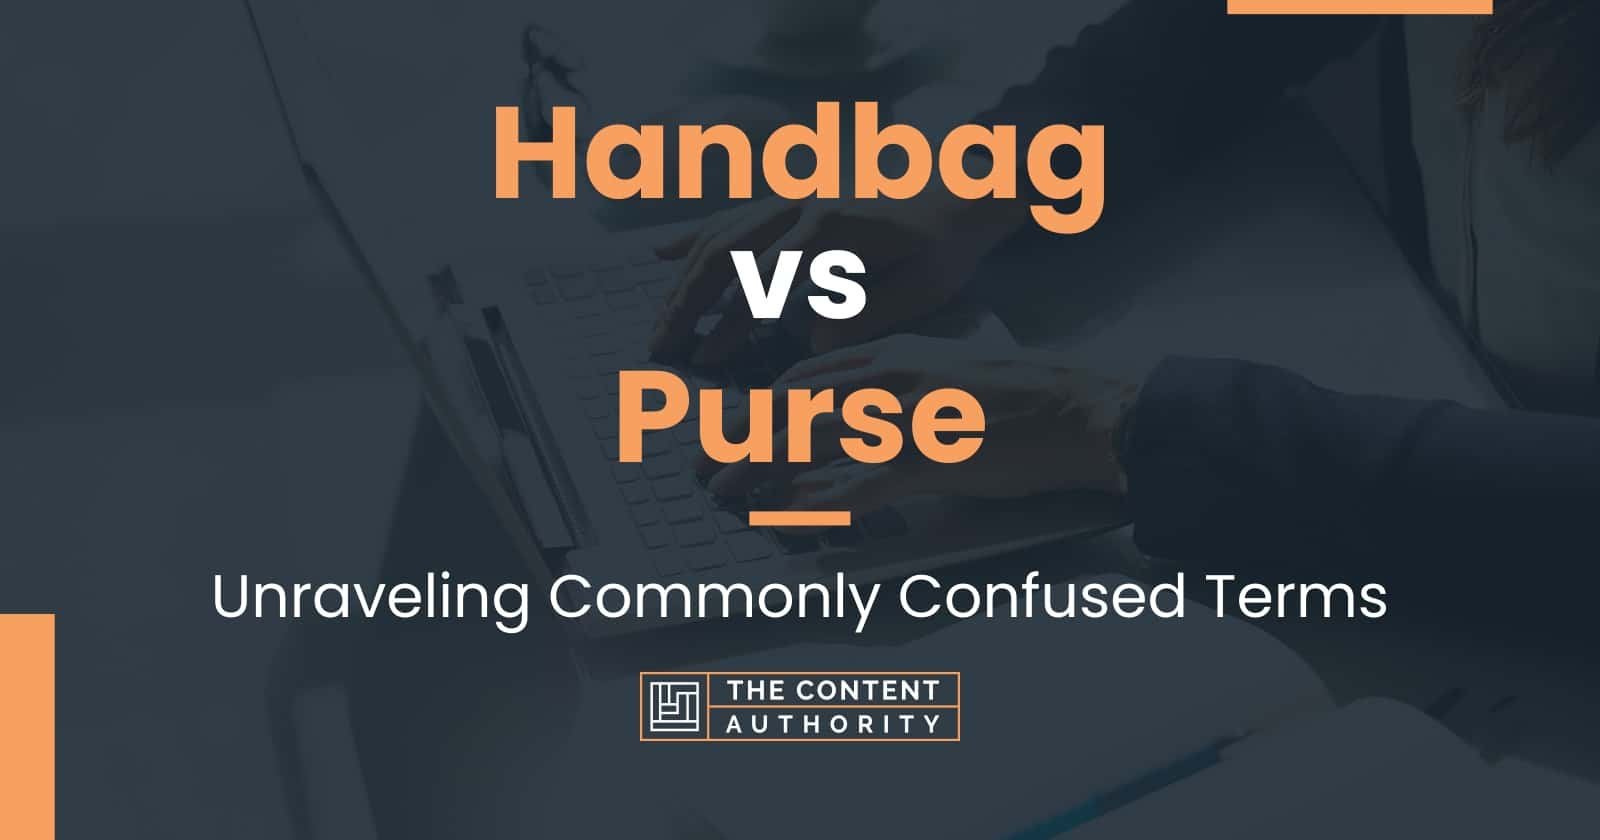 Handbag vs Purse: Unraveling Commonly Confused Terms